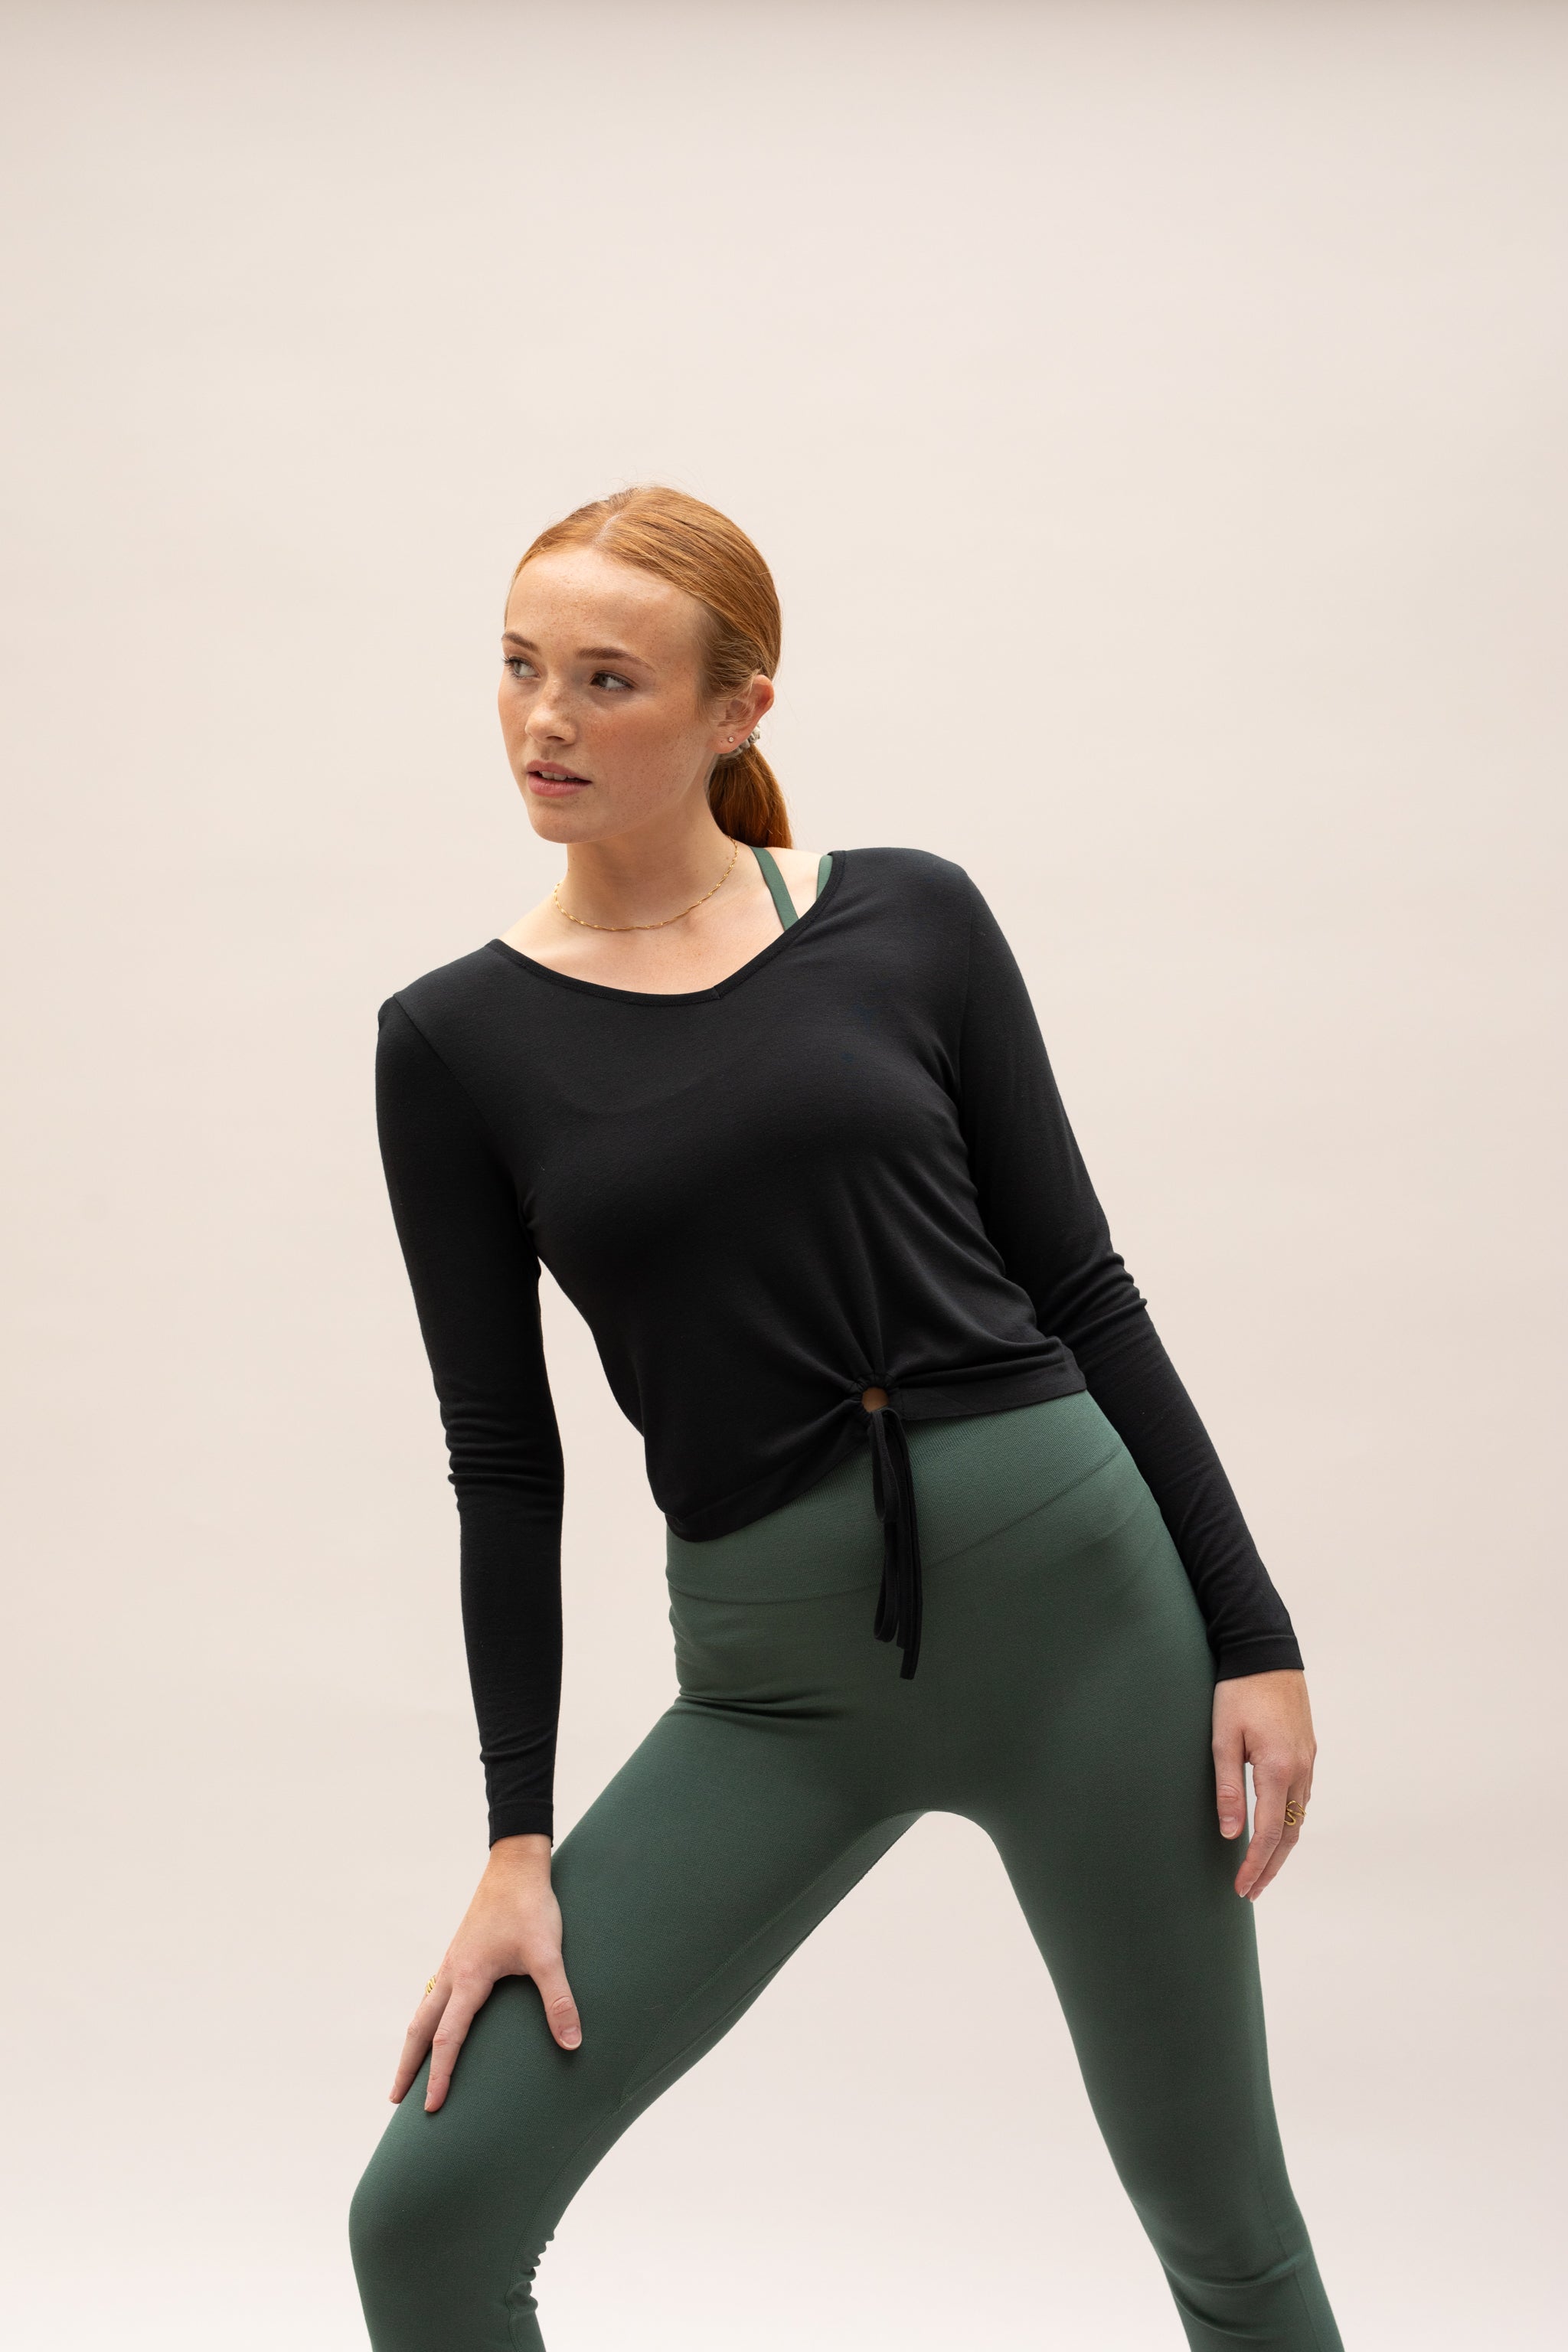 Black long sleeve layering top and green leggings from sustainable women's activewear brand, Jilla.